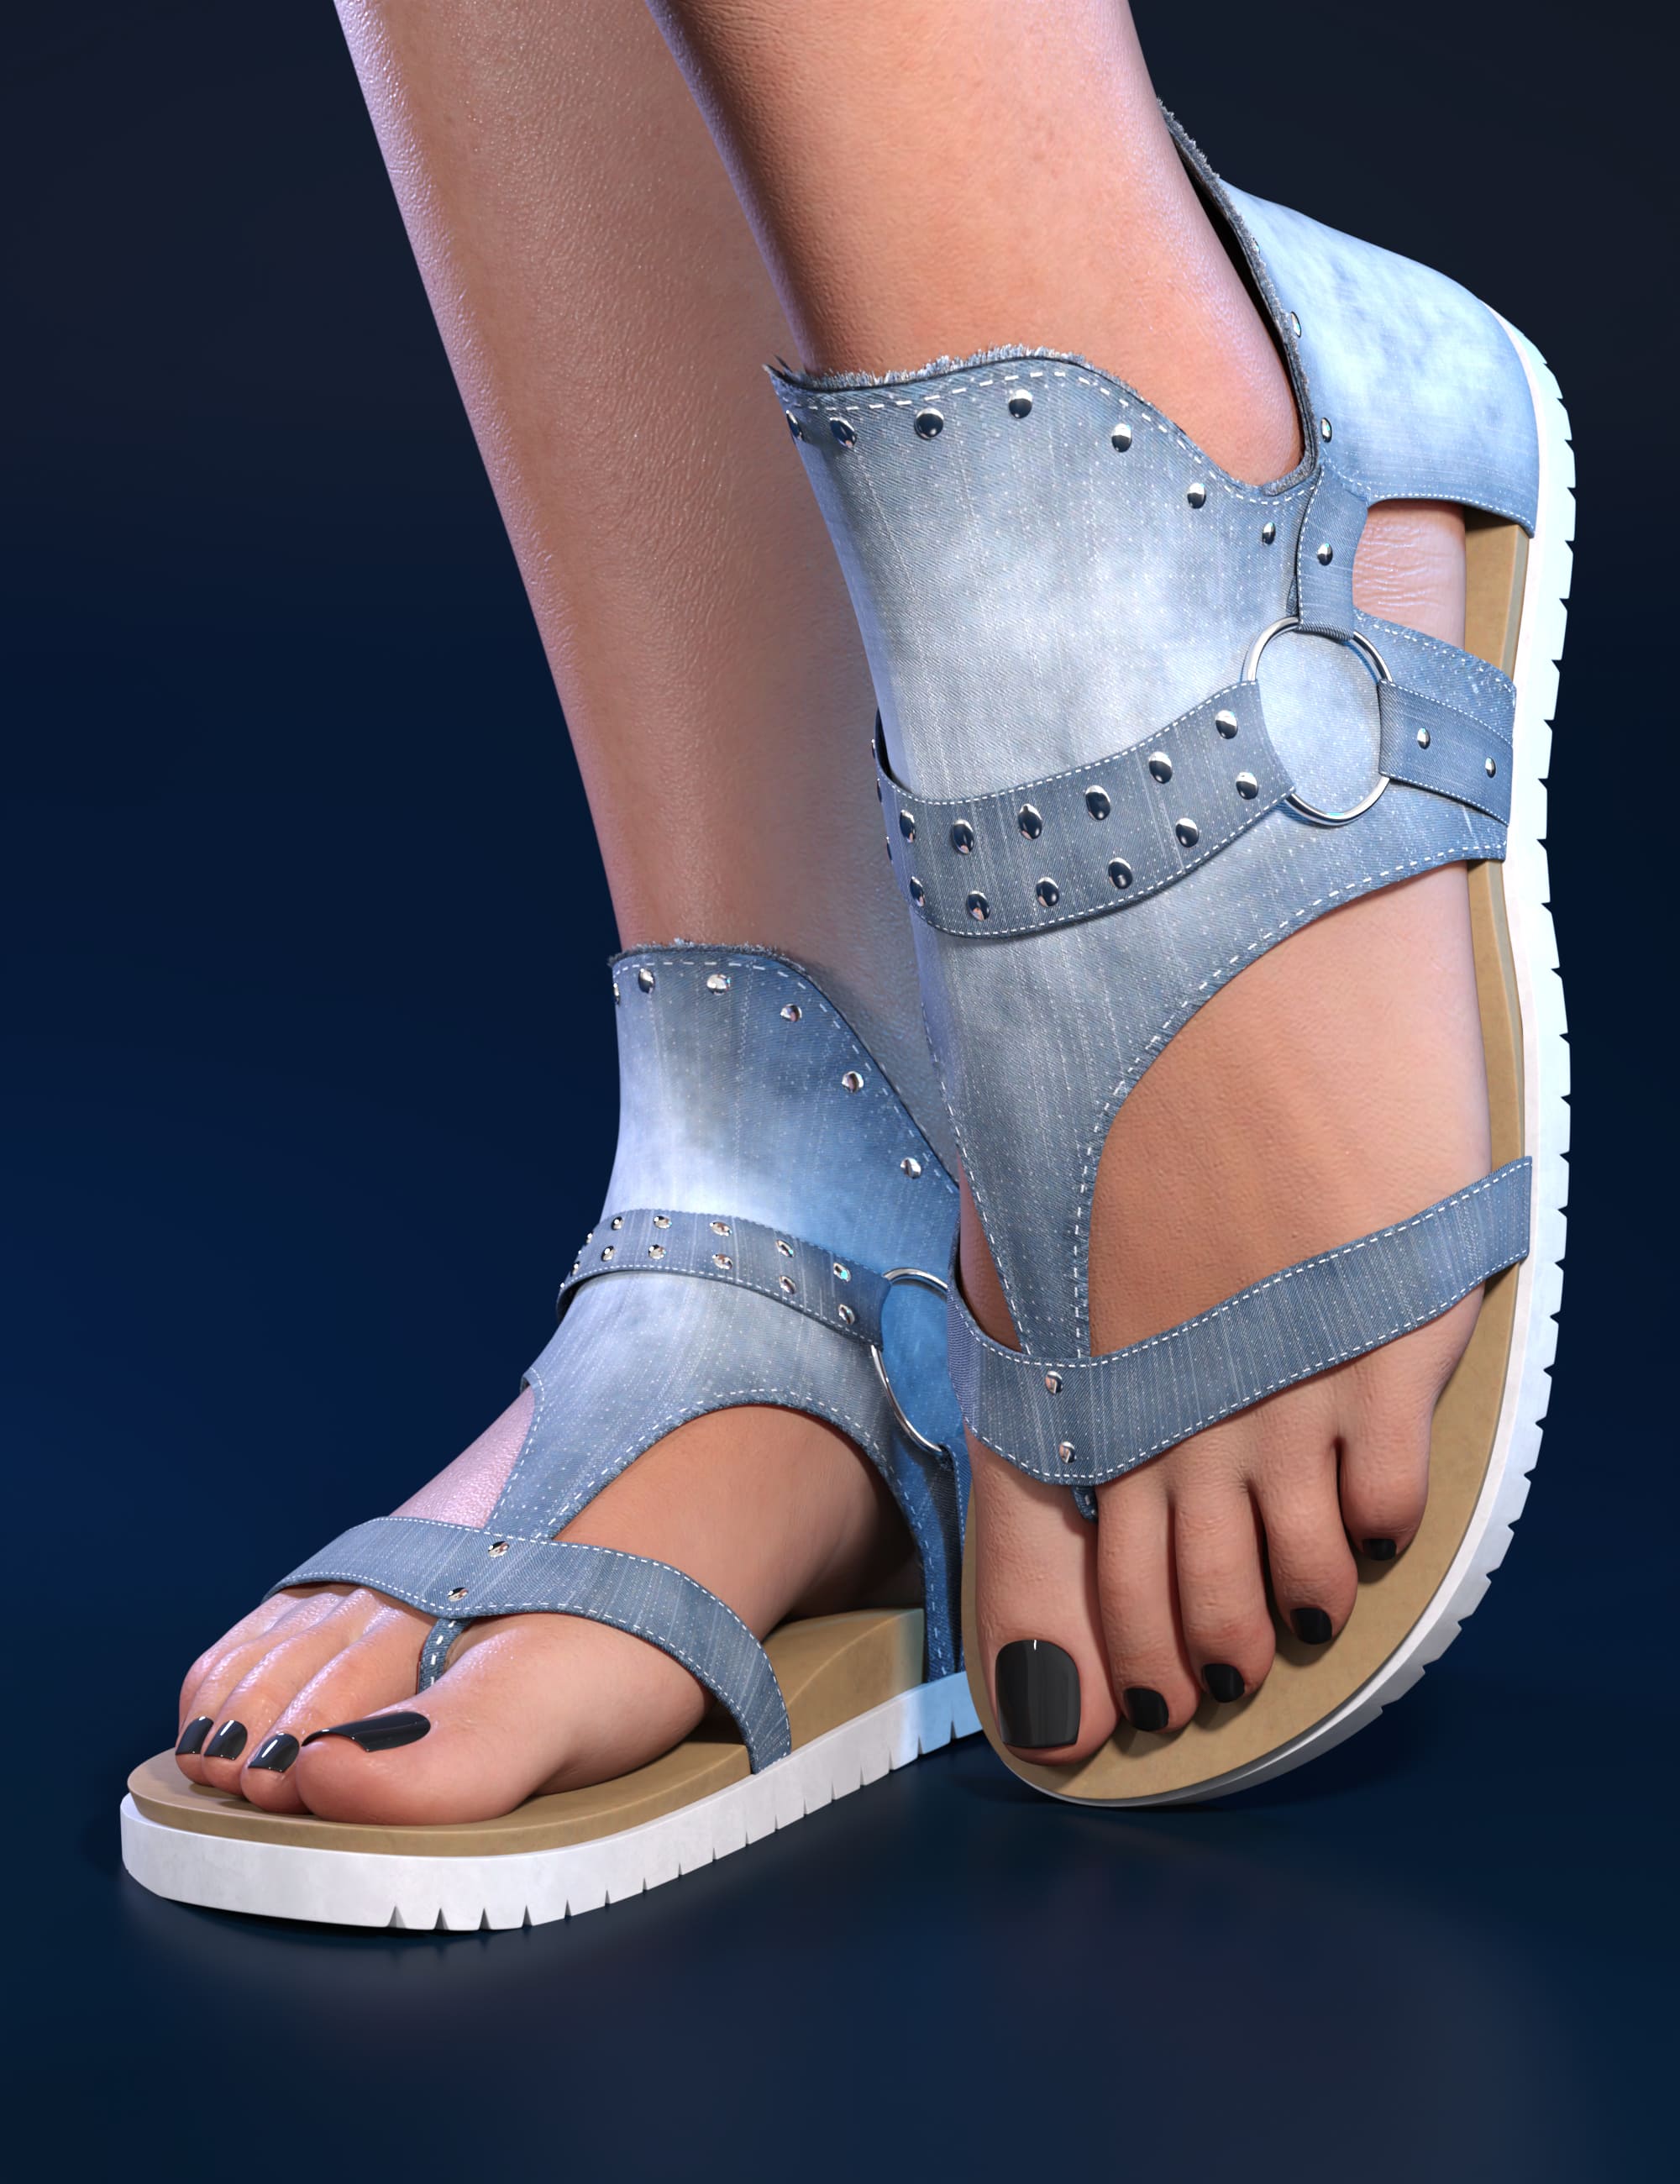 Candace Denim Sandals for Genesis 8 and 9_DAZ3D下载站